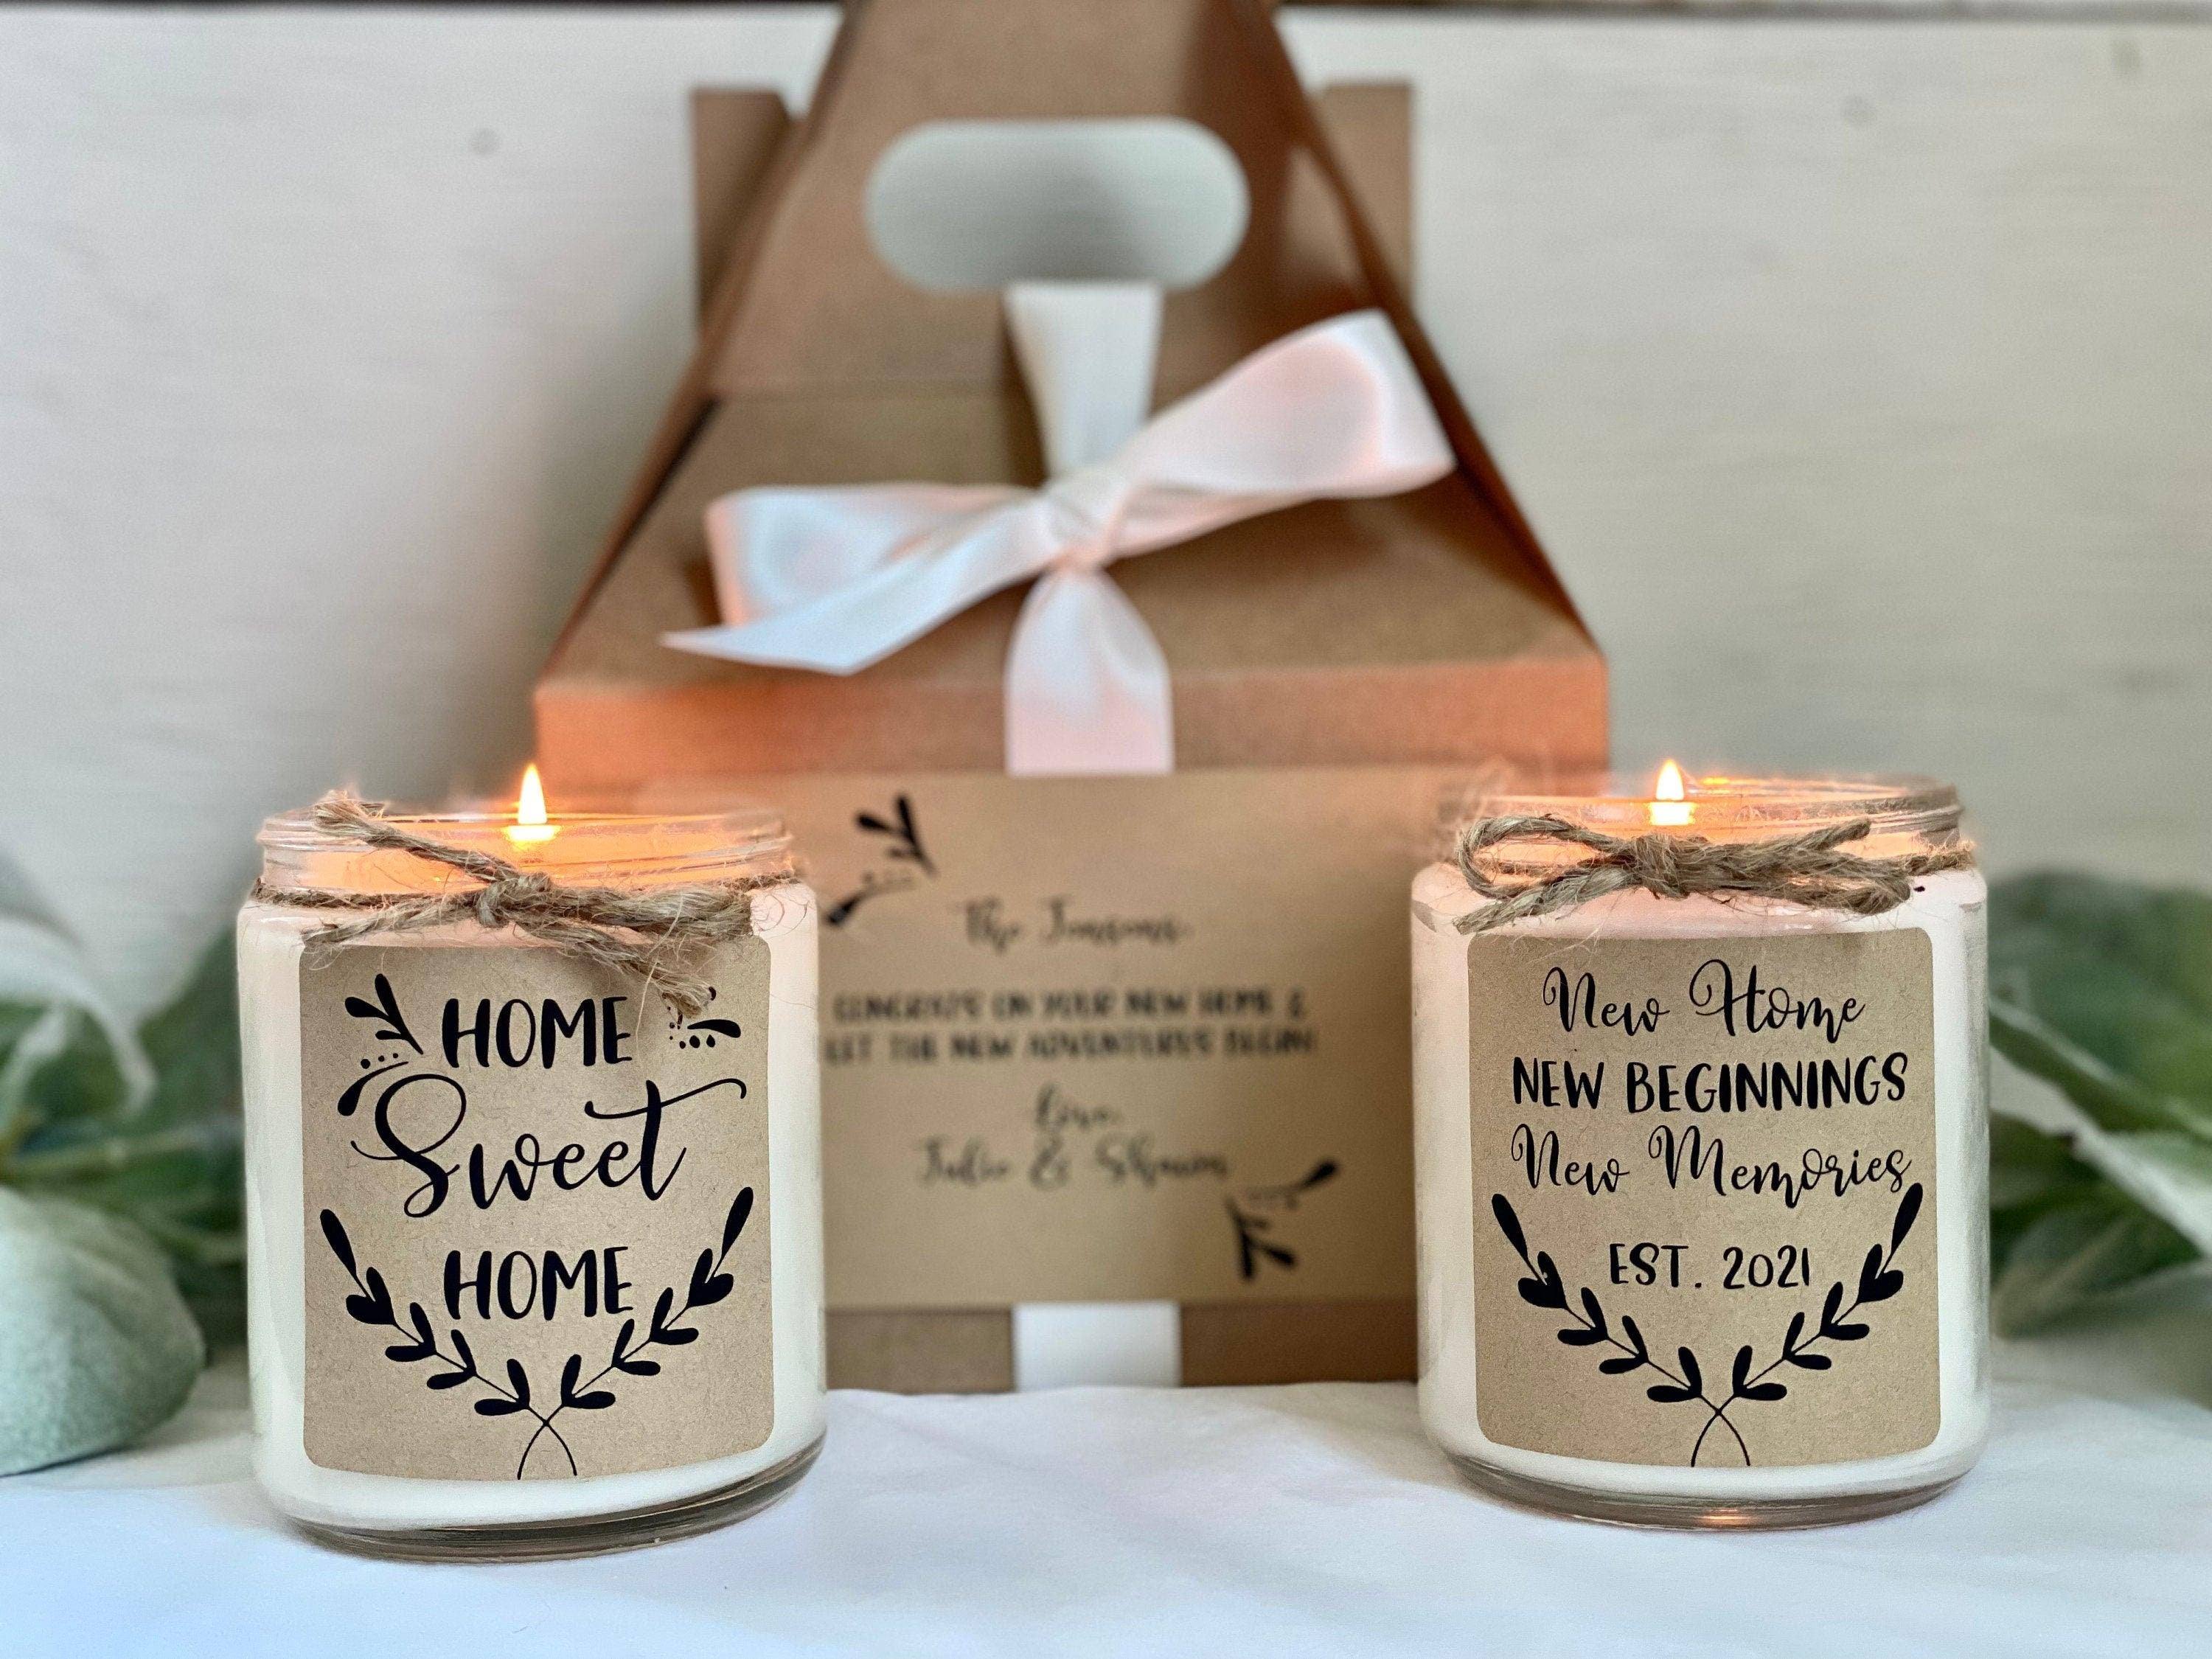 Fresh Linen Candles, Hand-poured 8 oz Soy Candles, Housewarming Gift